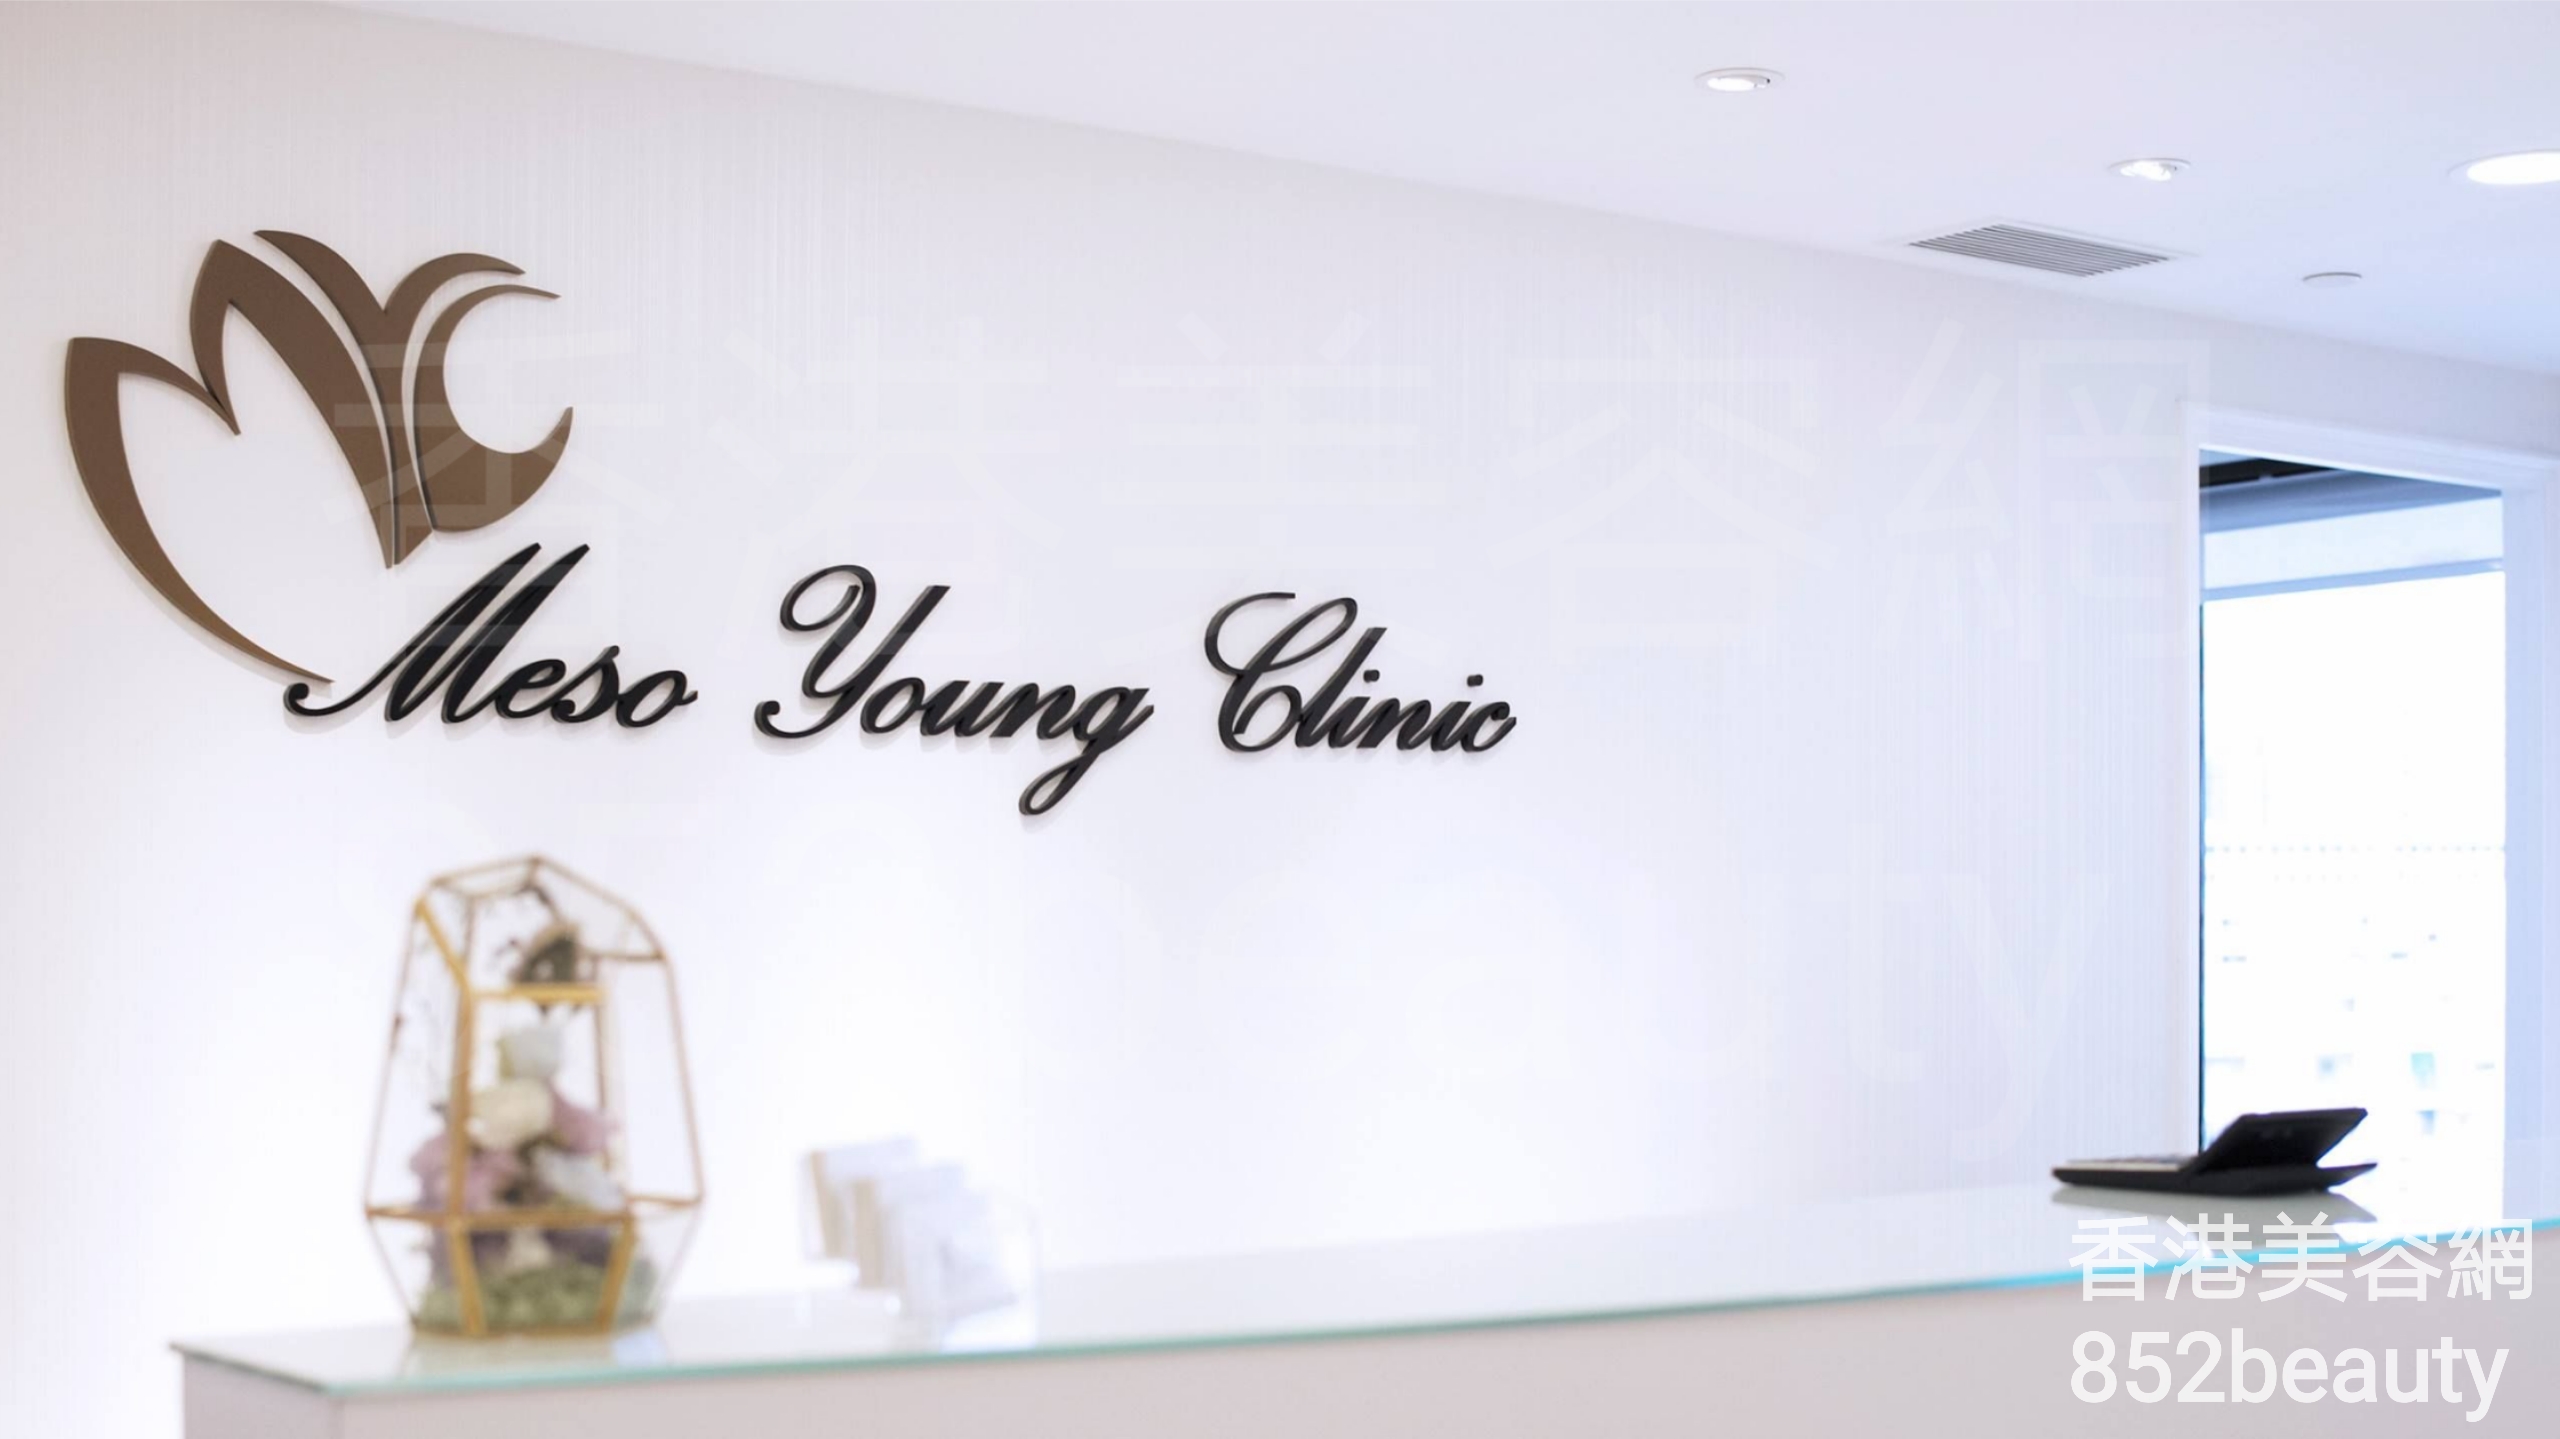 Hair Removal: Meso Young Clinic